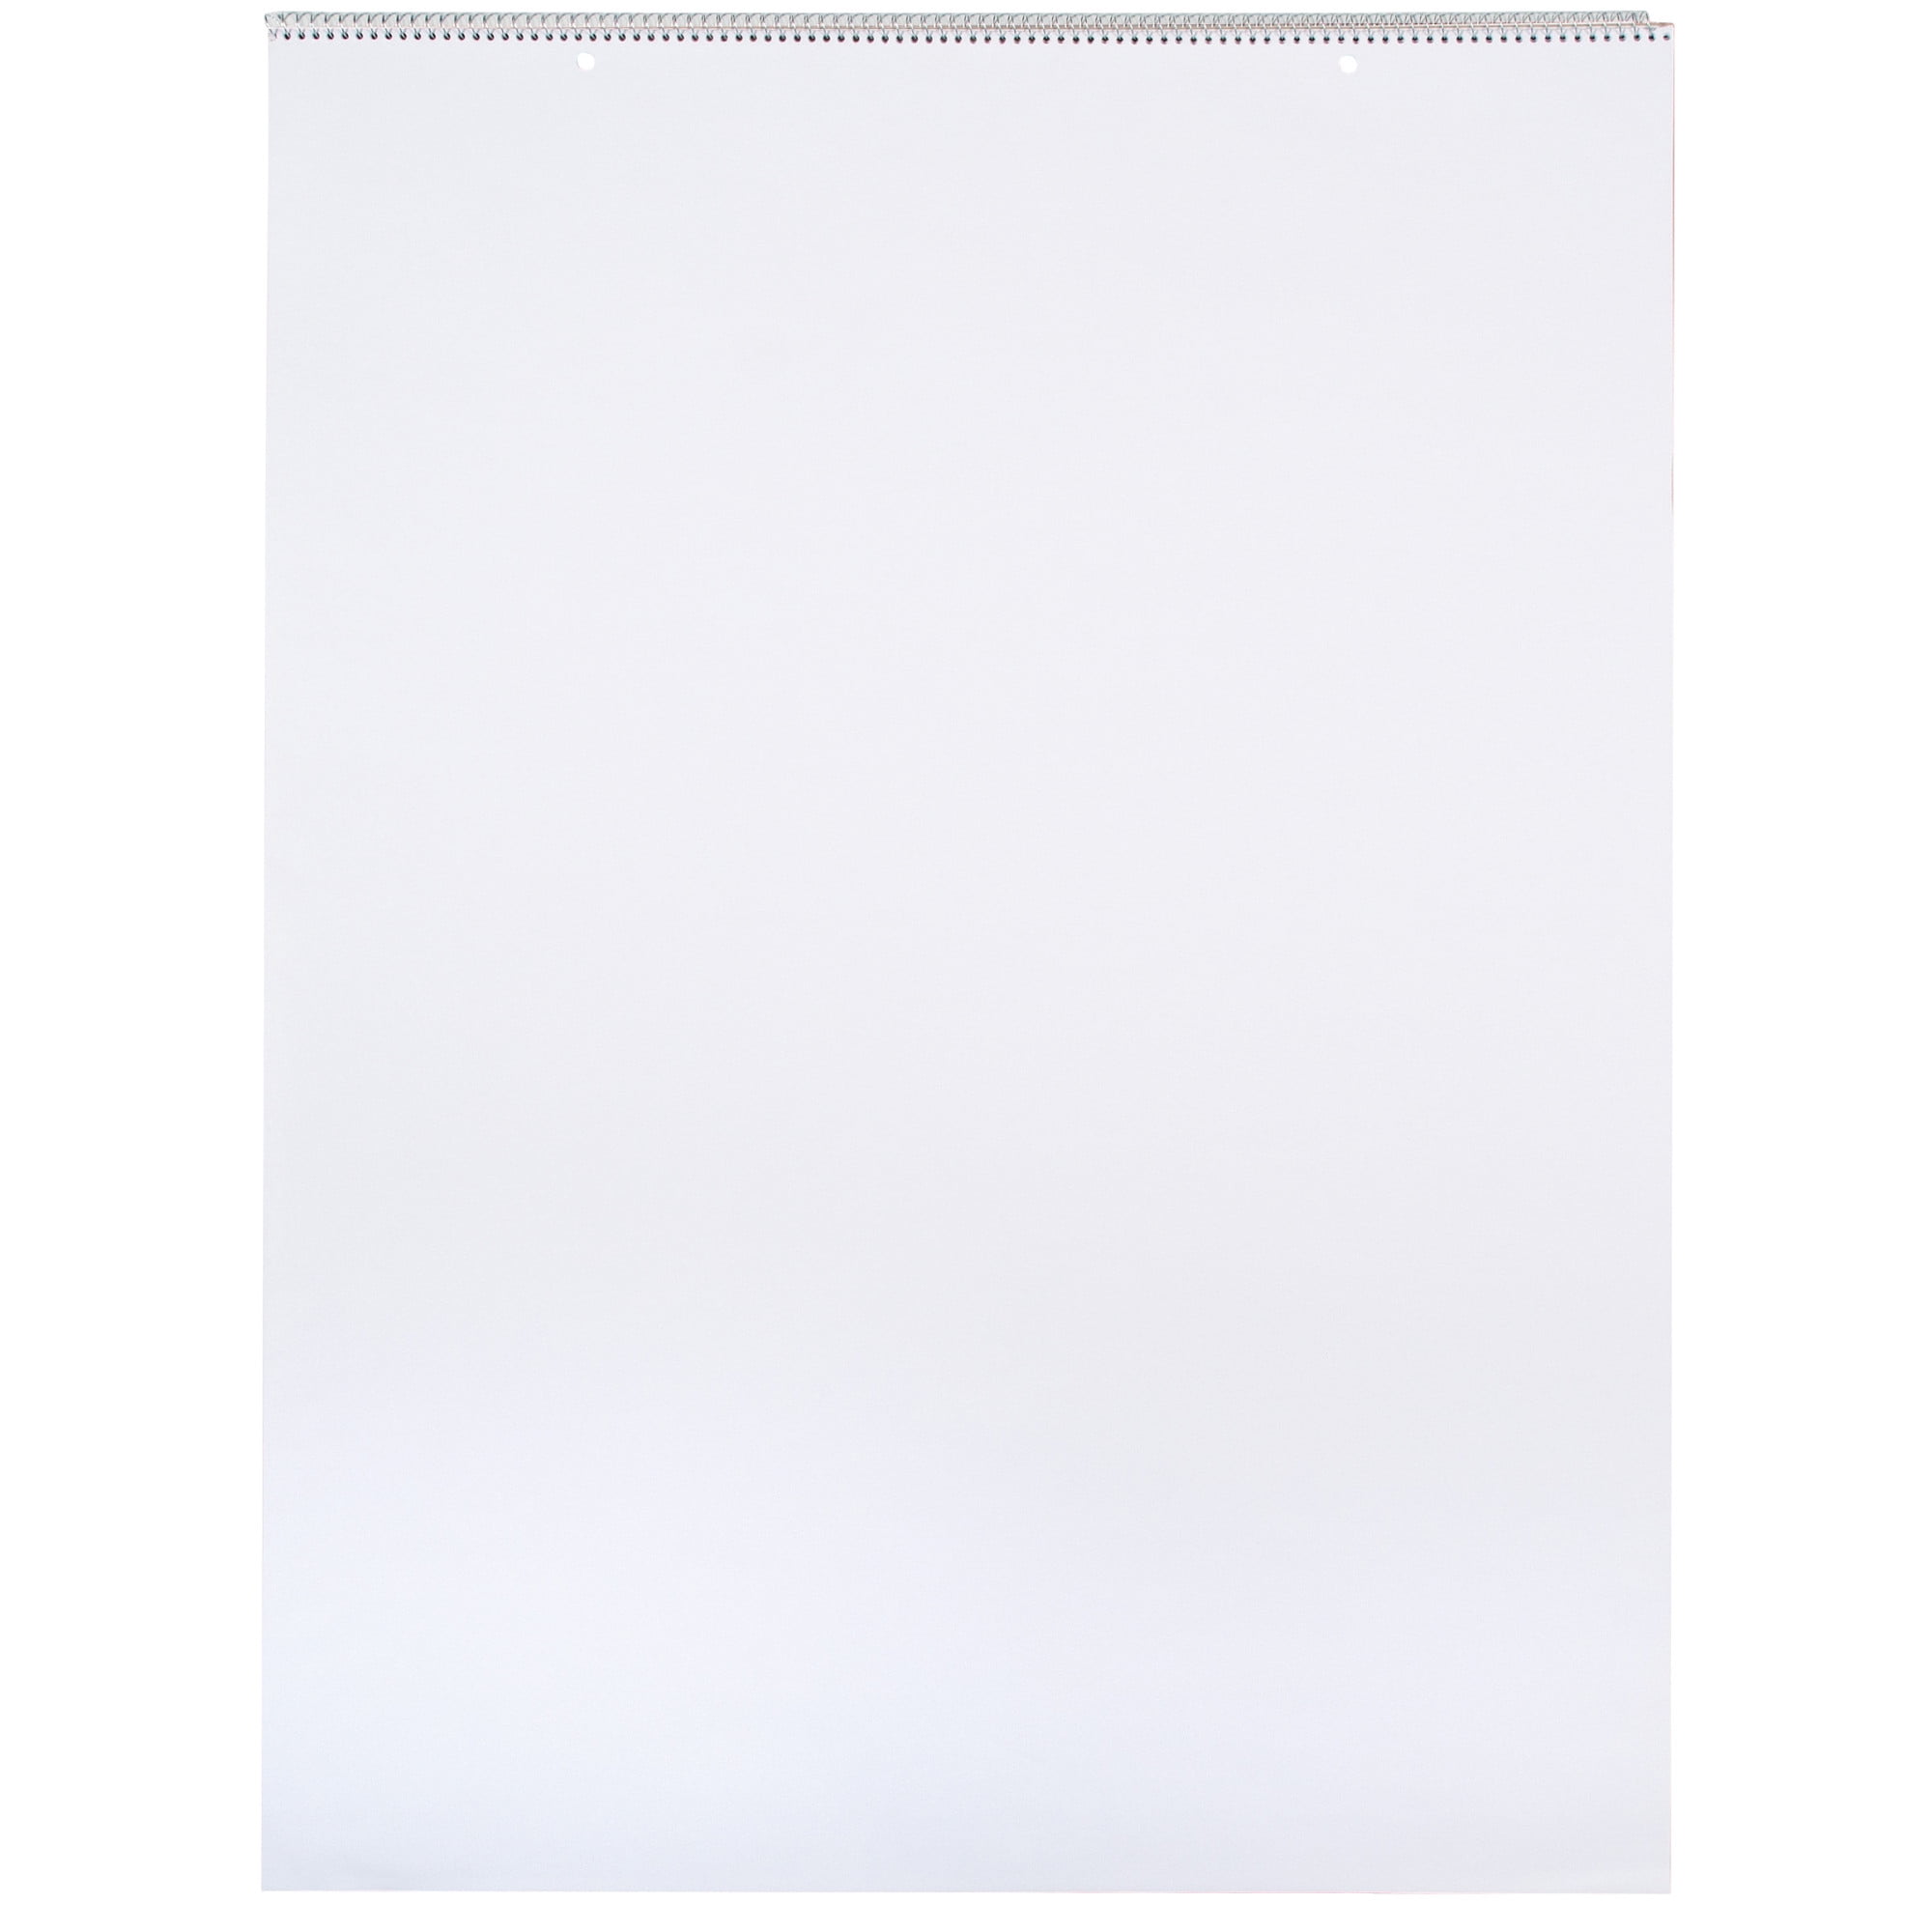 School Smart Newsprint Story Chart Pad, 1 inch Ruling, 24 inch x 36 inch, 100 Sheets, White